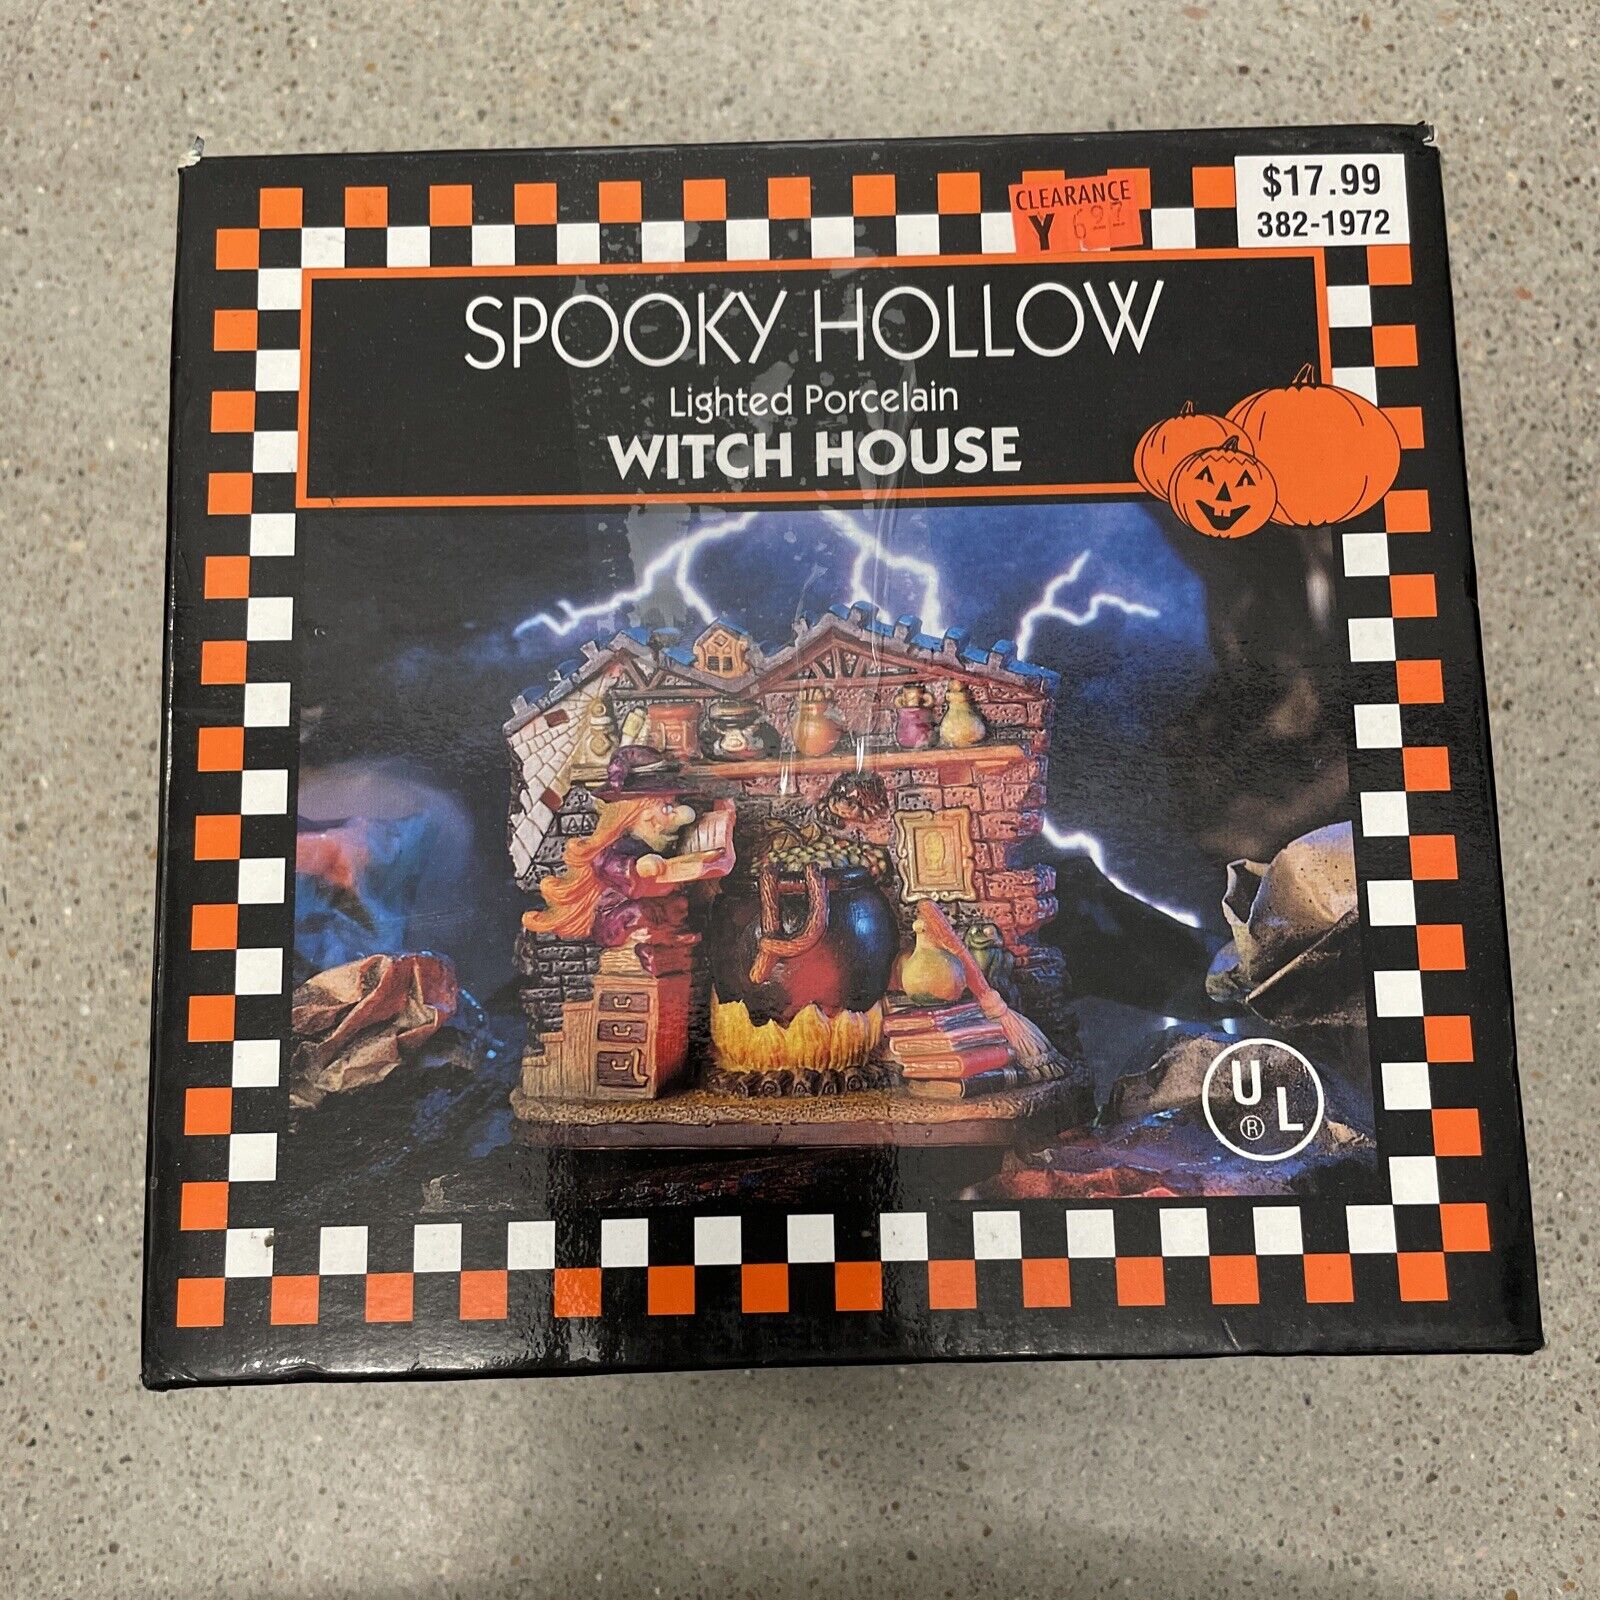 Vintage 1997 Halloween Spooky Hollow Lighted Porcelain Witch House Boxed